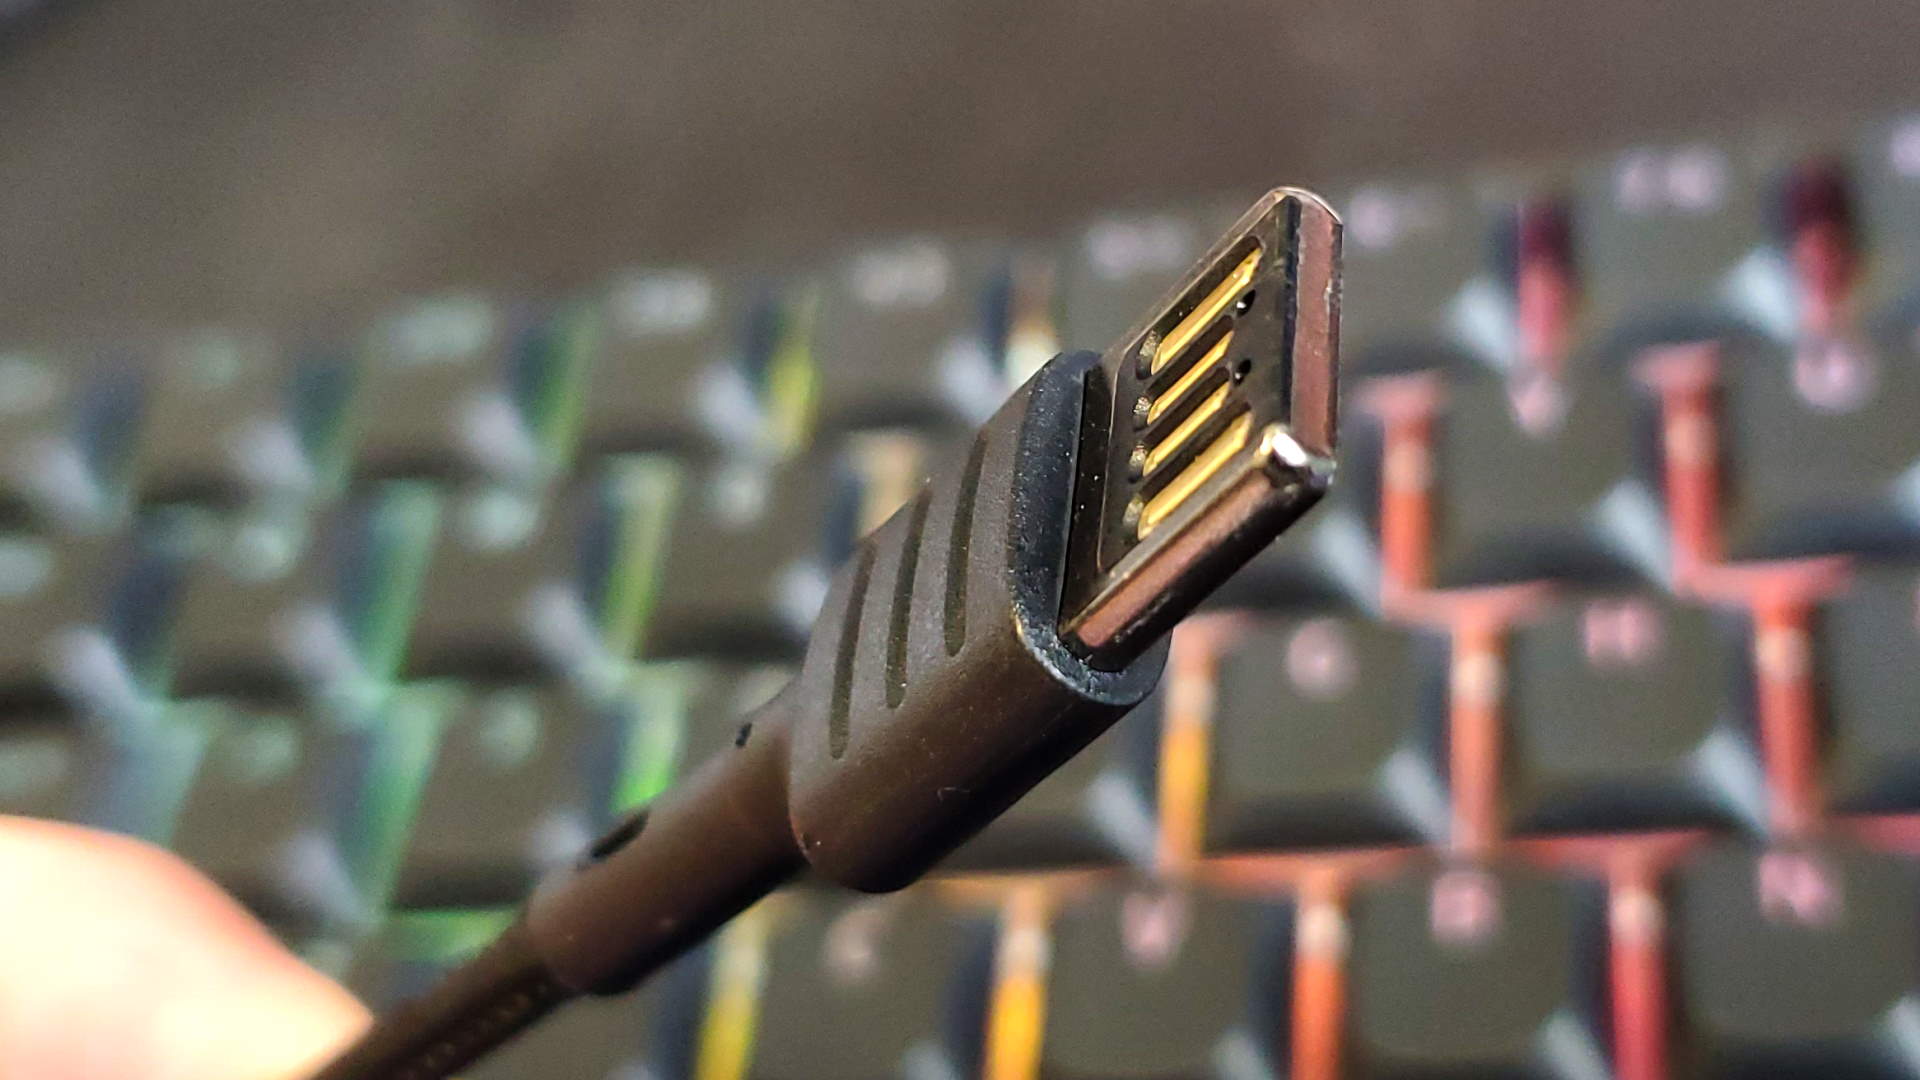 Reversible USB Type-C: What Is It? Everything You Need To Know